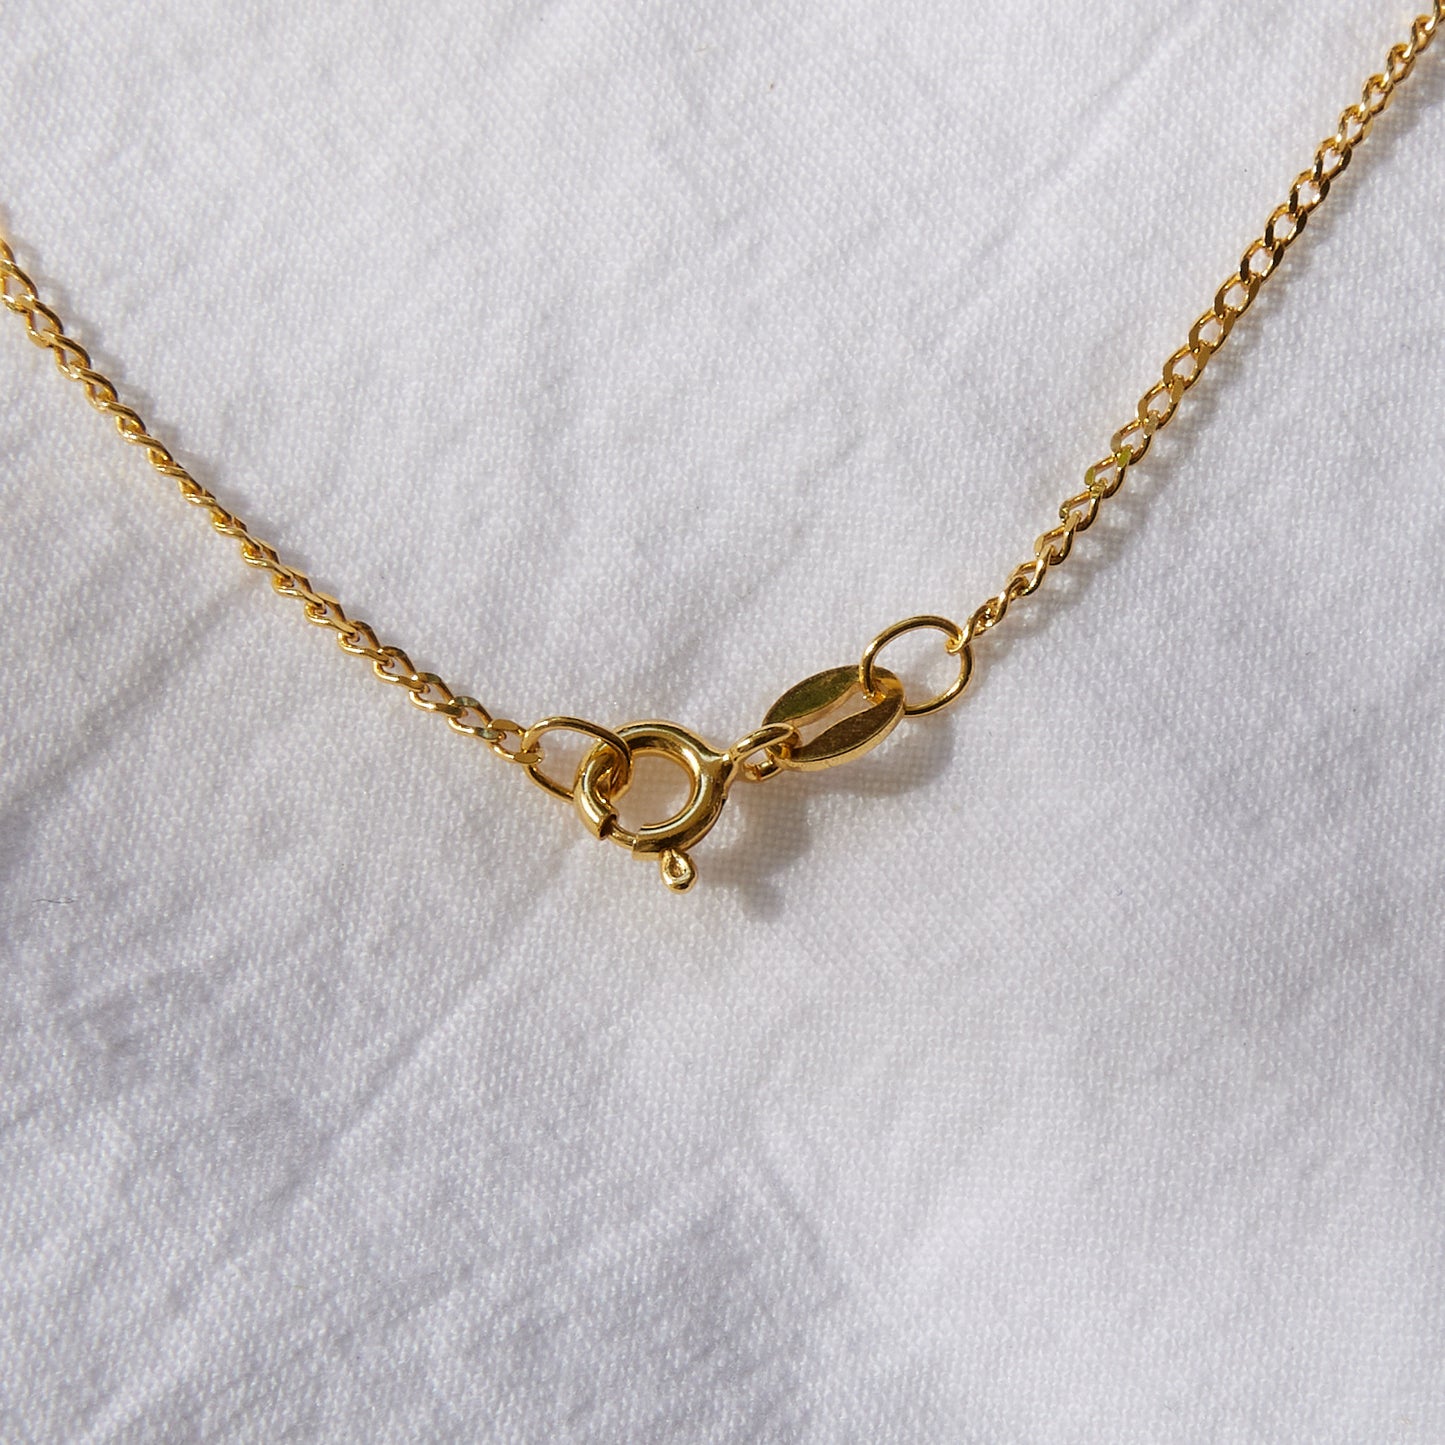 24k Gold plated Compass Necklace